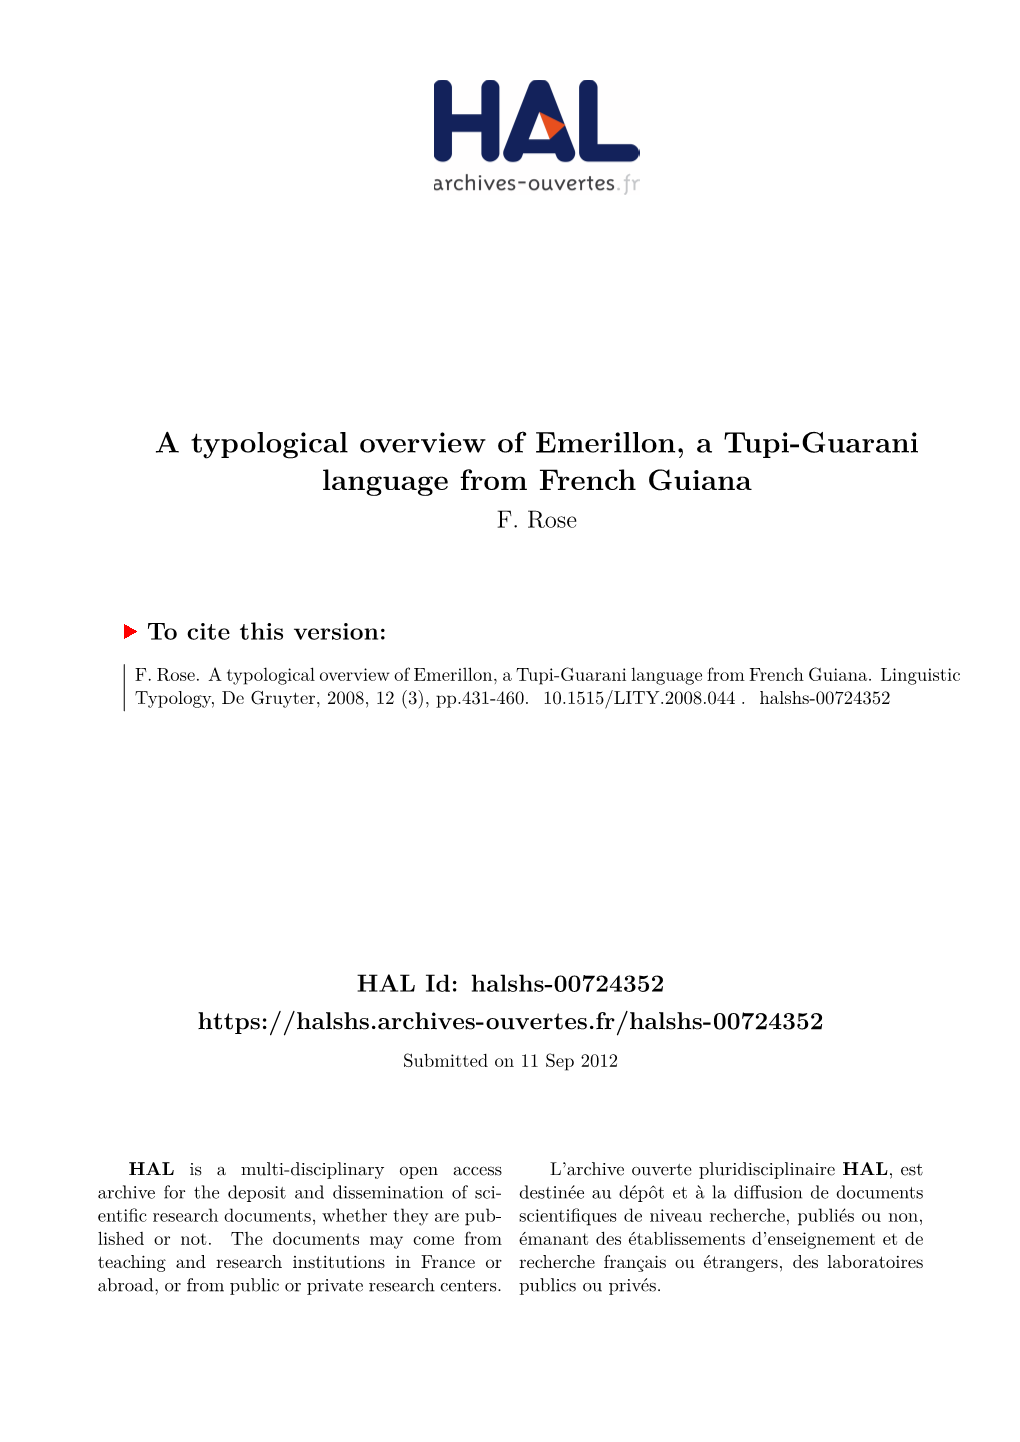 A Typological Overview of Emerillon, a Tupi-Guarani Language from French Guiana F